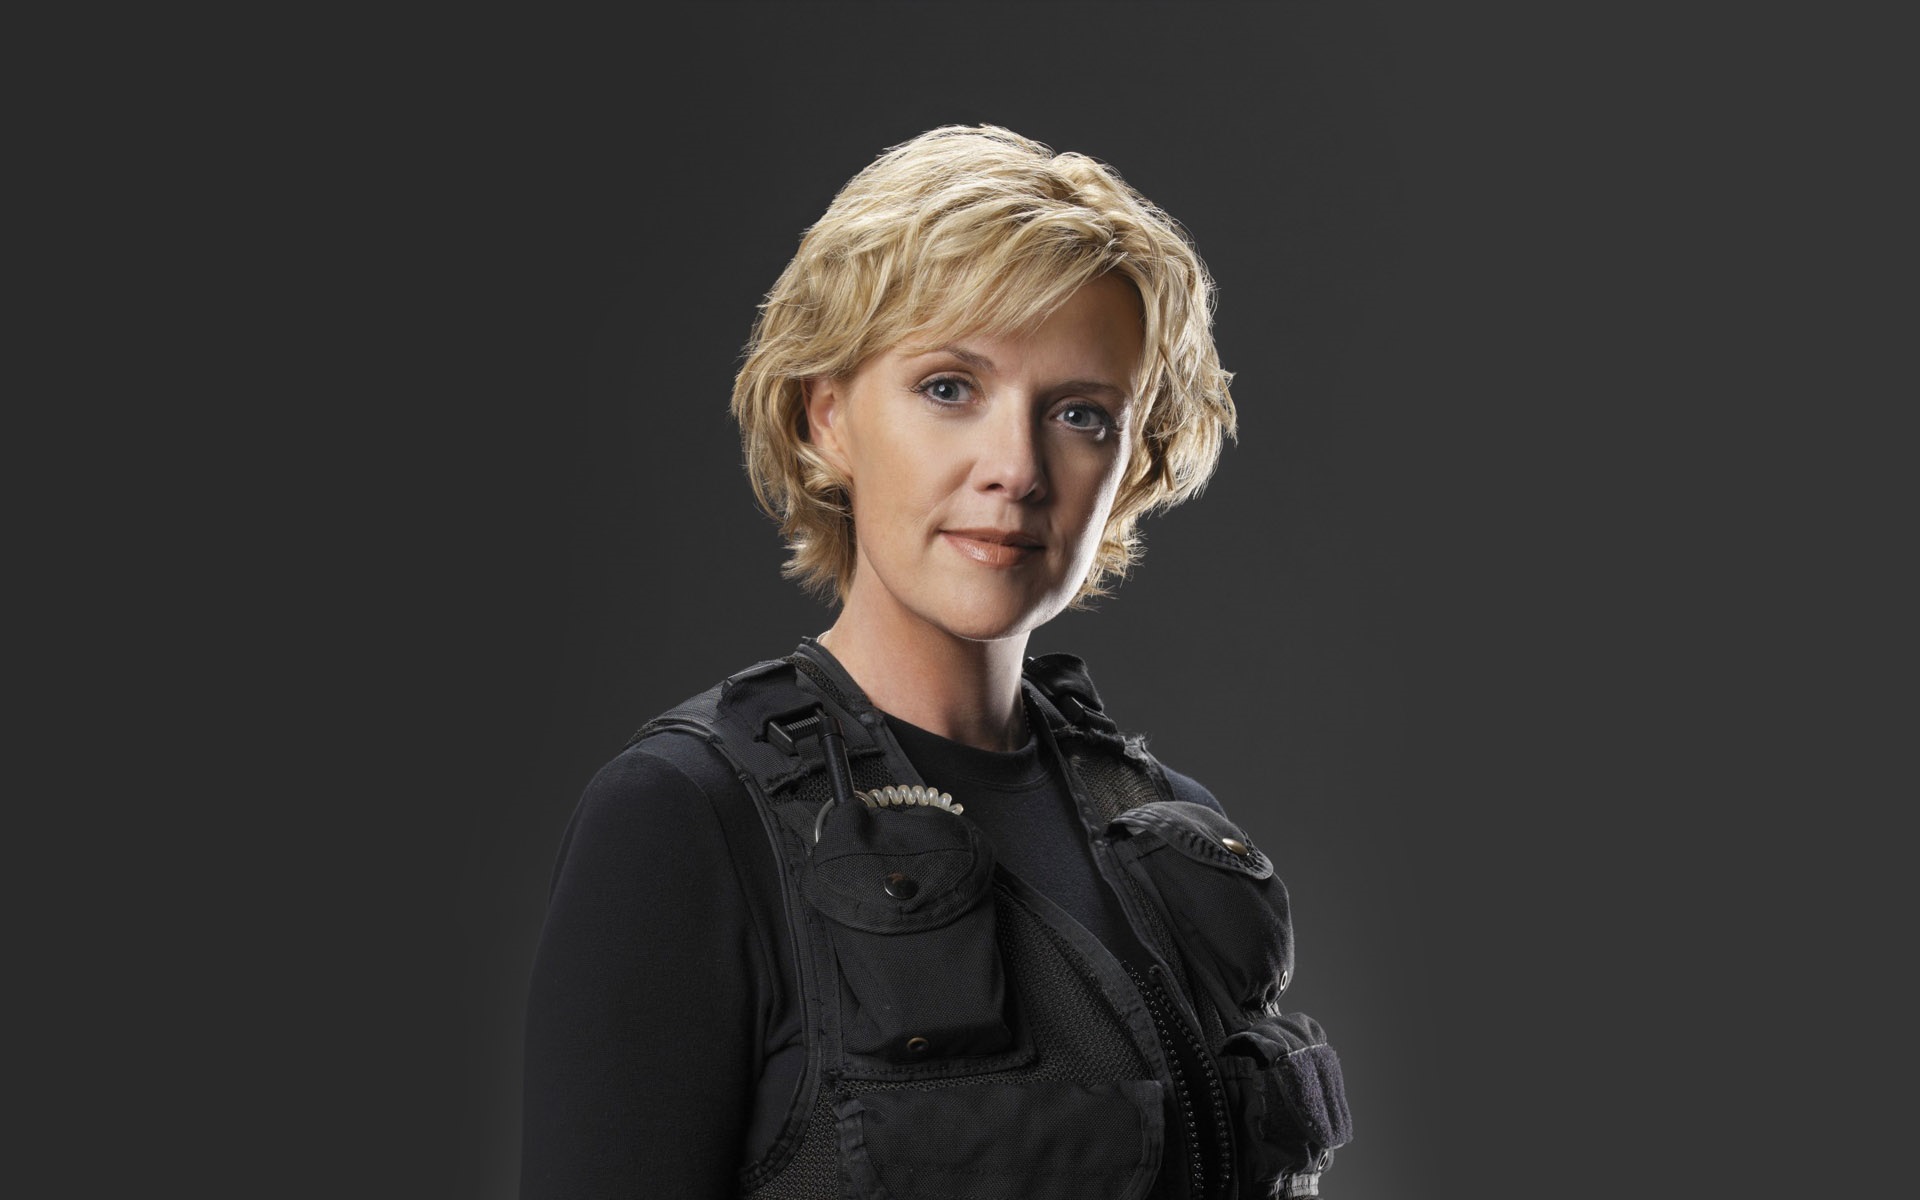 Wallpaper Amanda Tapping 02 1920x1200 HD Picture Image 1920x1200. 